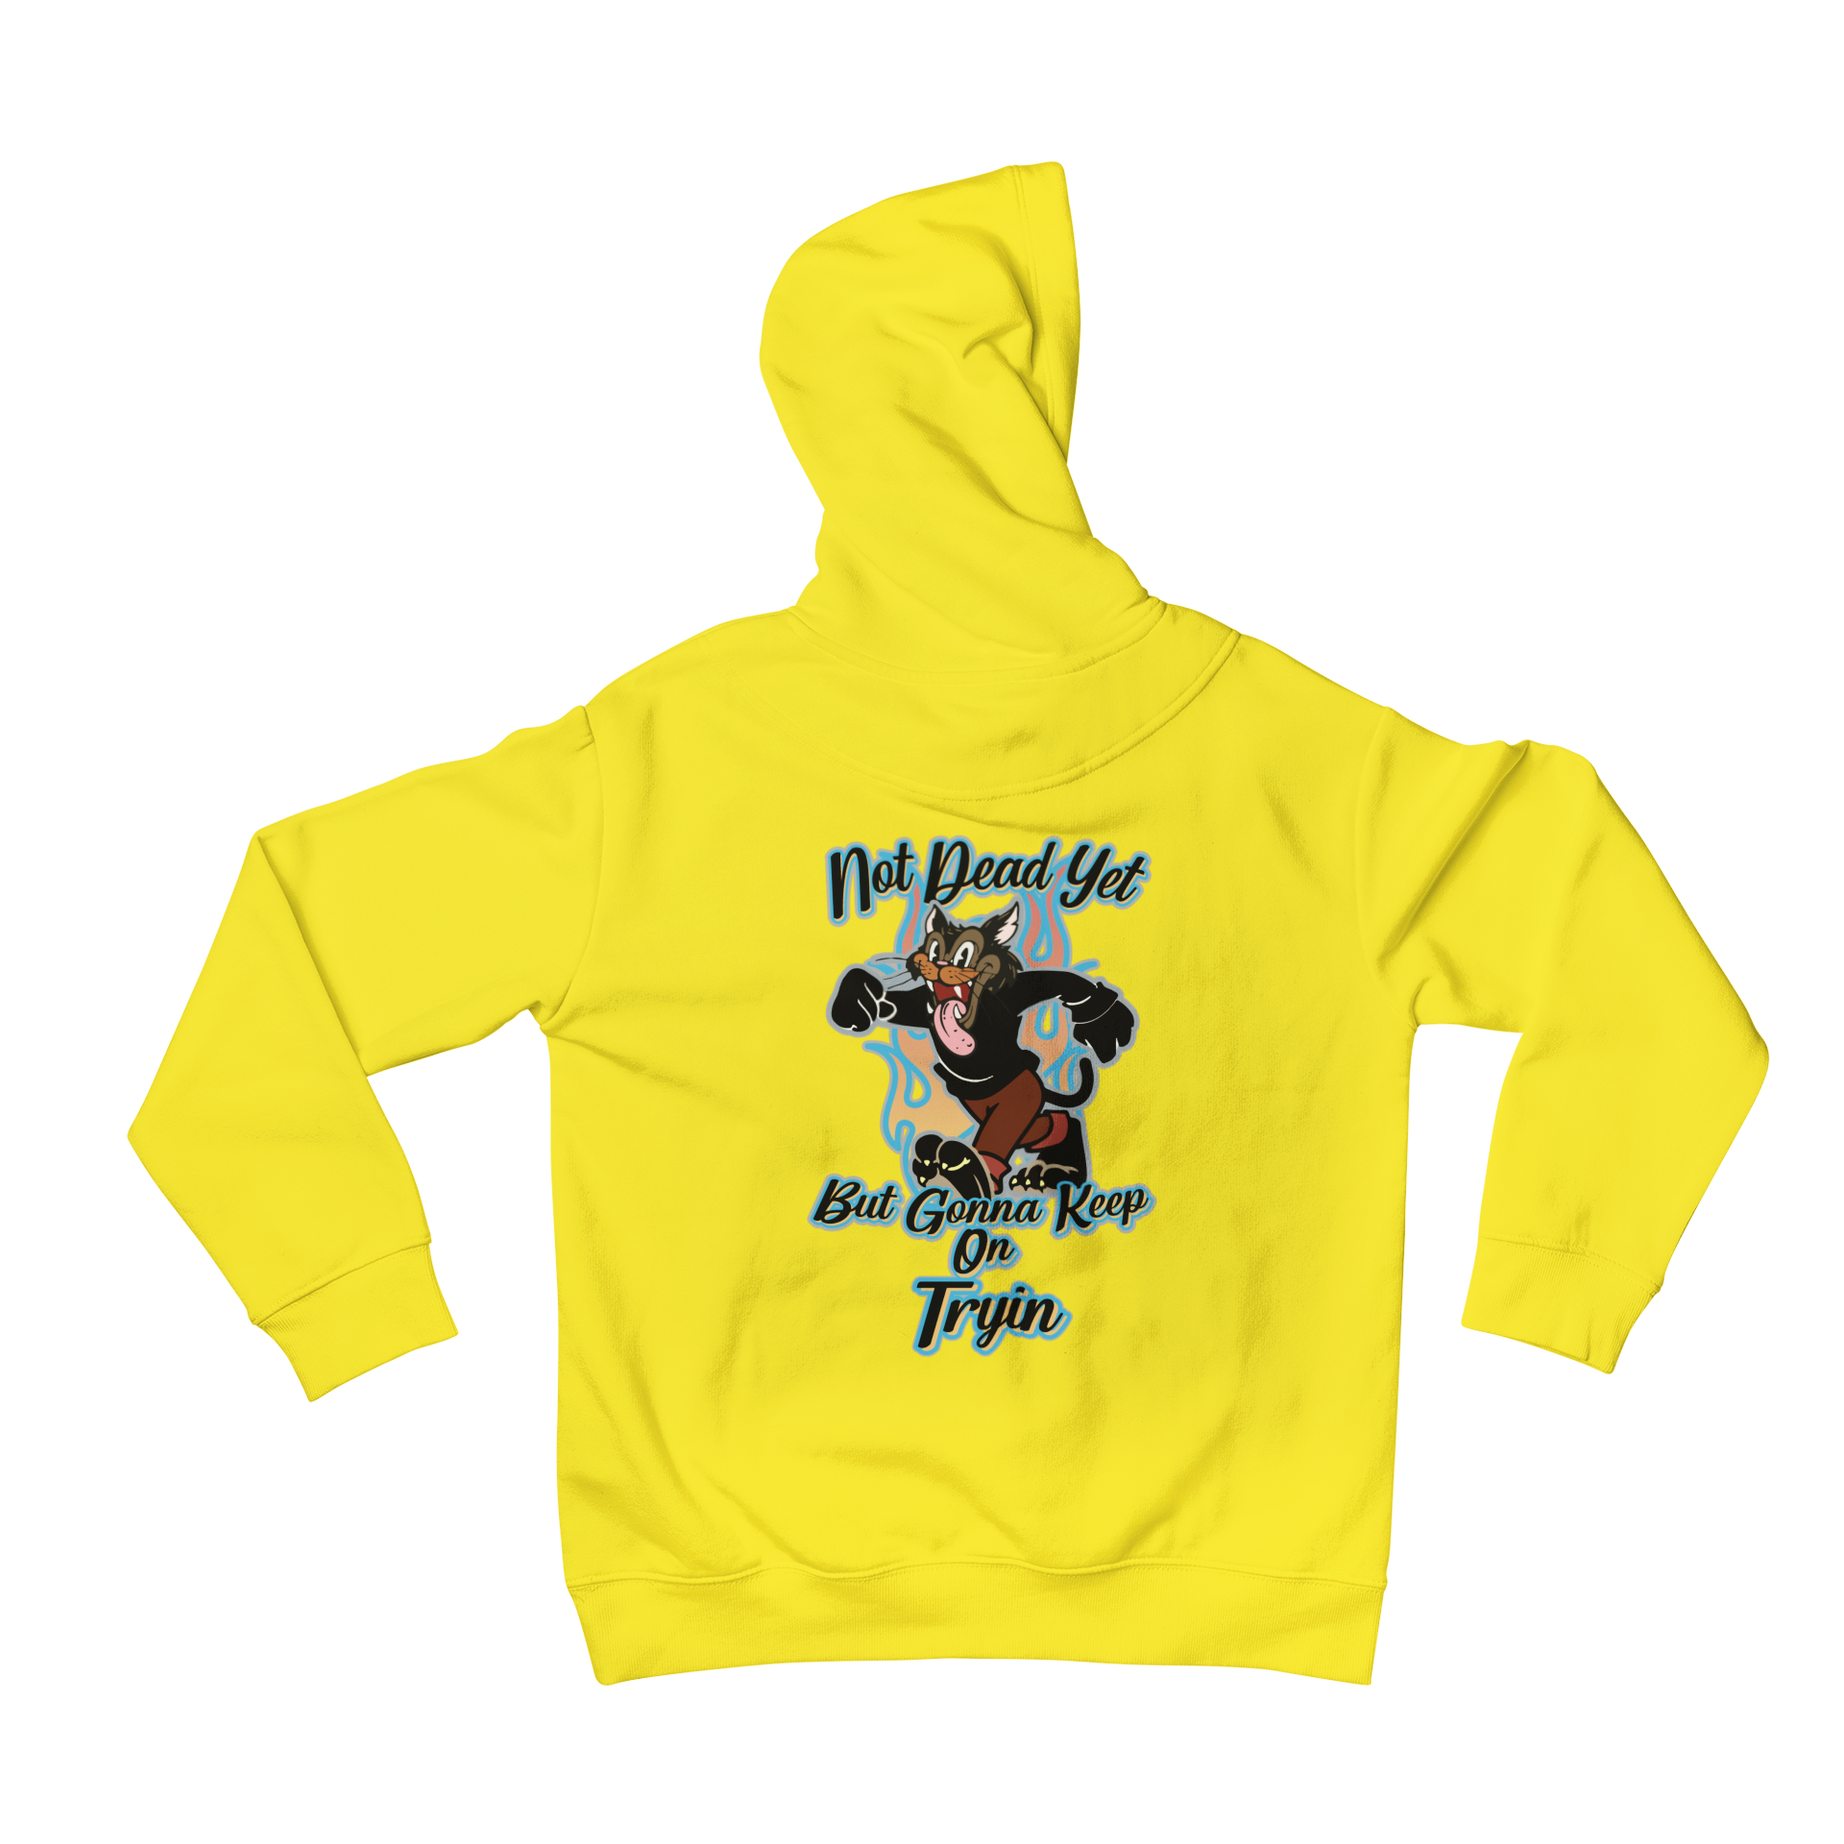 Teevolution's "Not Dead Yet" hoodie is perfect for those who want to keep on trying. This back print hoodie is made from high-quality materials and comes with a unique design. Get yours today and show off your personality with style!